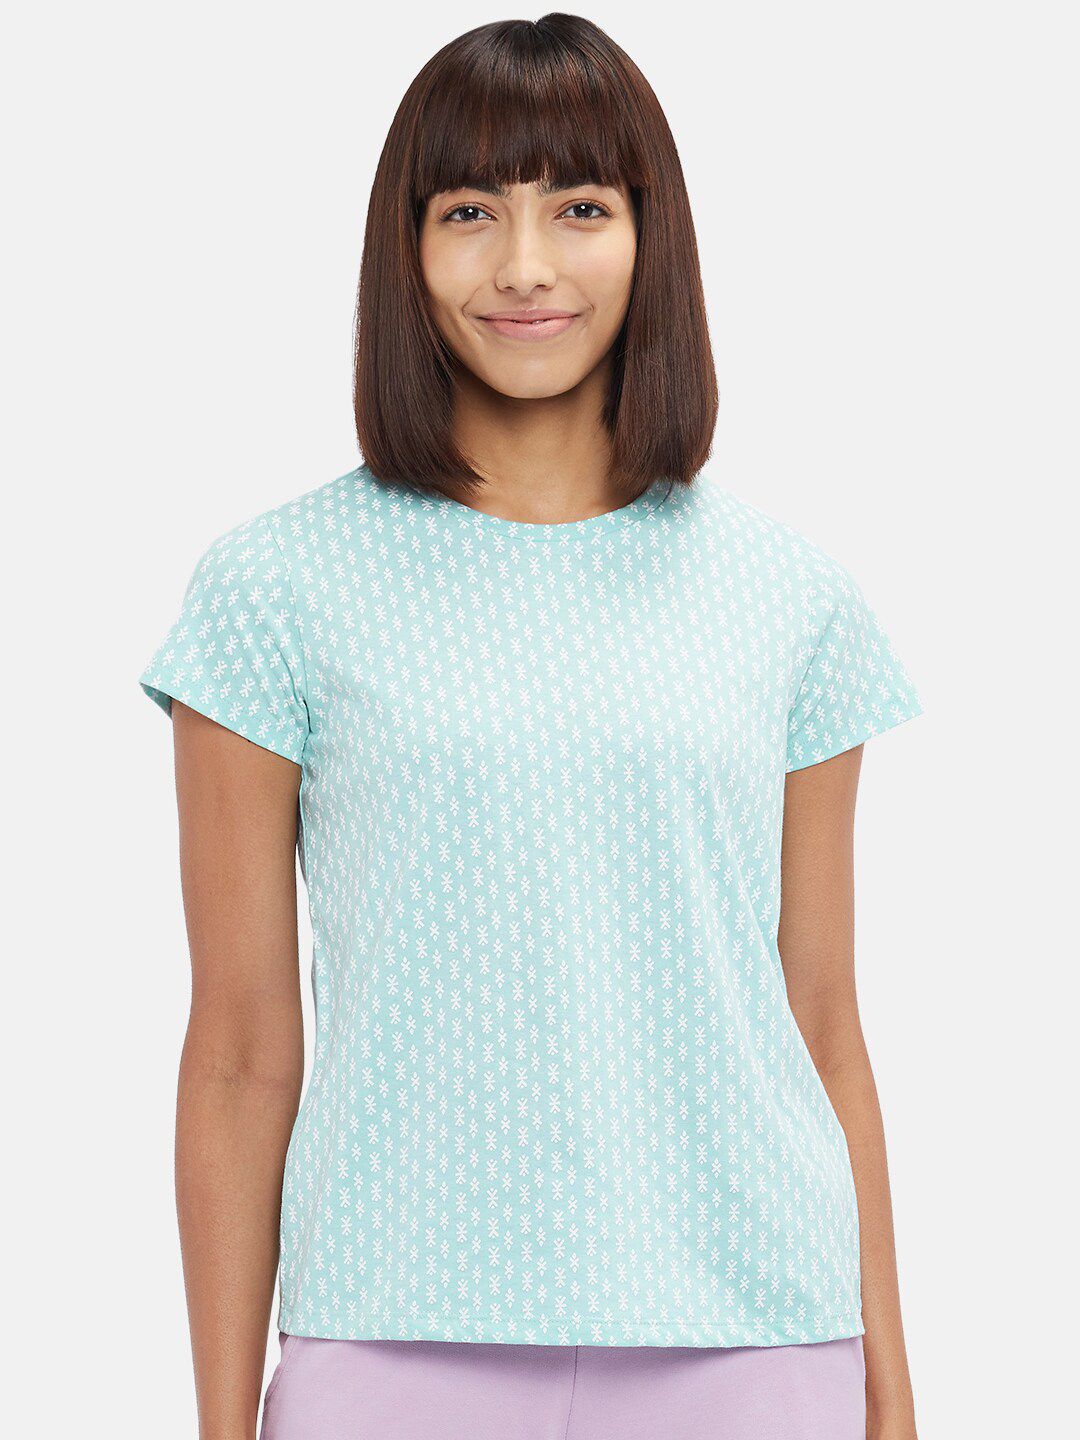 Dreamz by Pantaloons Blue Print Lounge tshirt Price in India